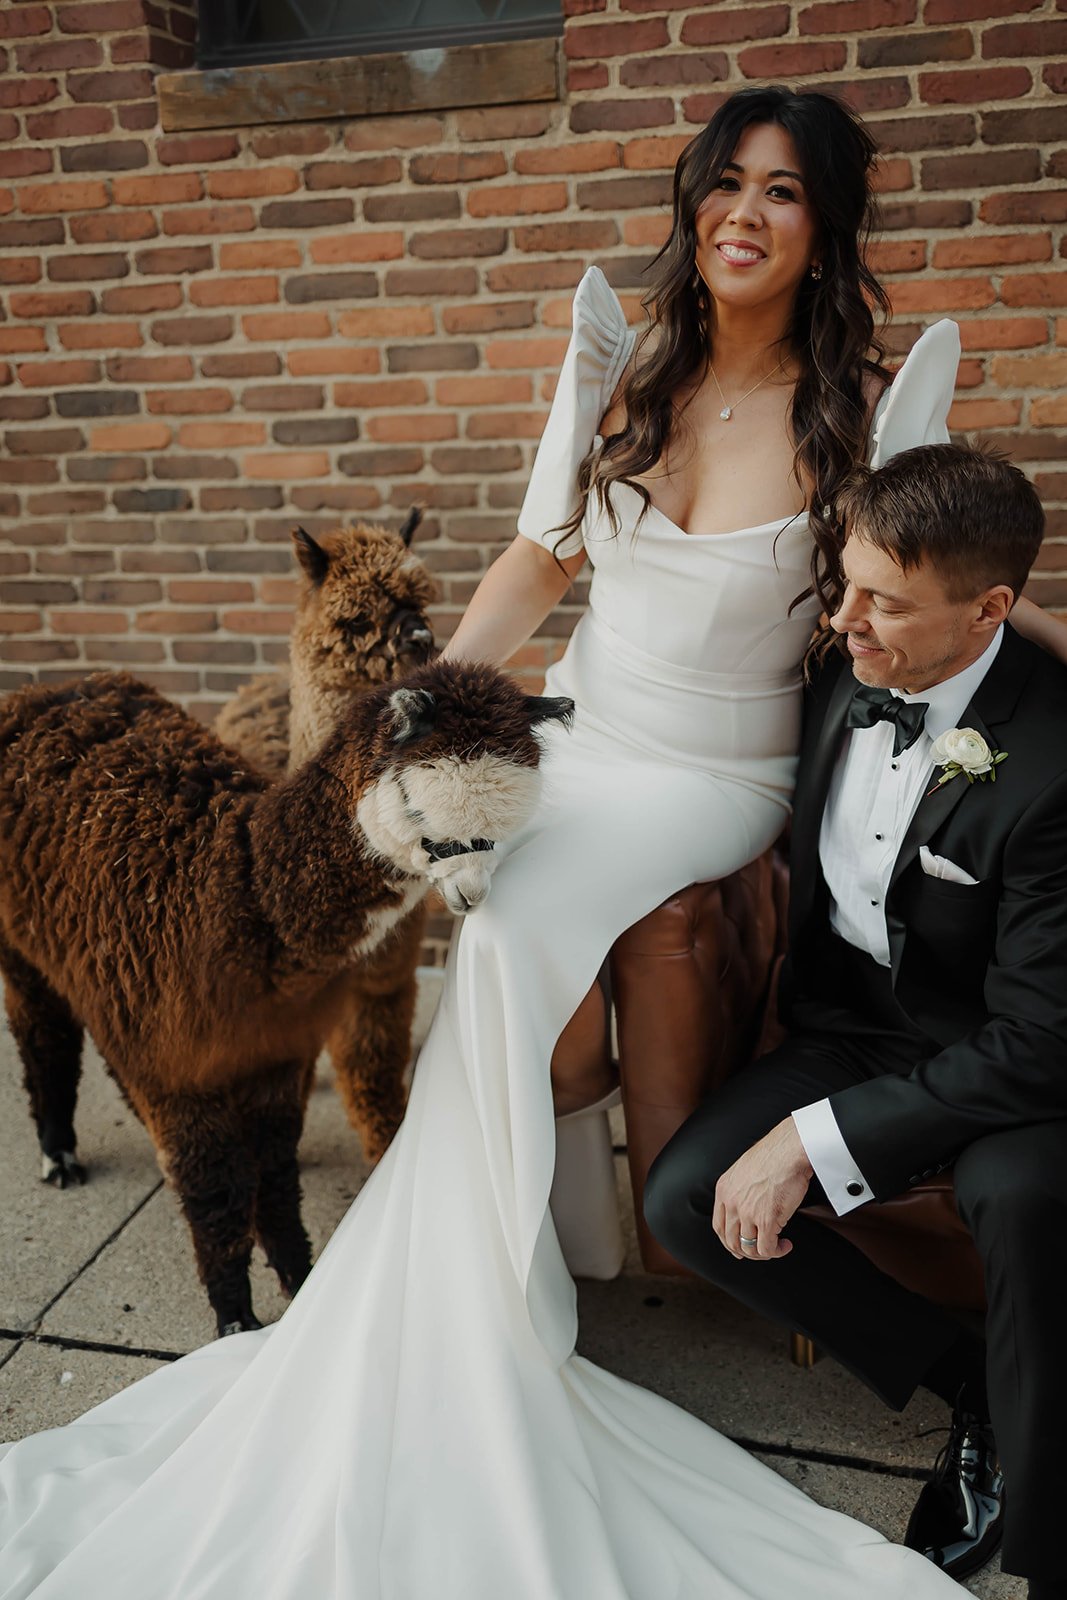  A bride and groom sit on a couch outside a brick wedding venue next to a pair of alpacas. The groom looks at the alpacas, smiling, and the bride smiles with her hand on one of the alpacas. 